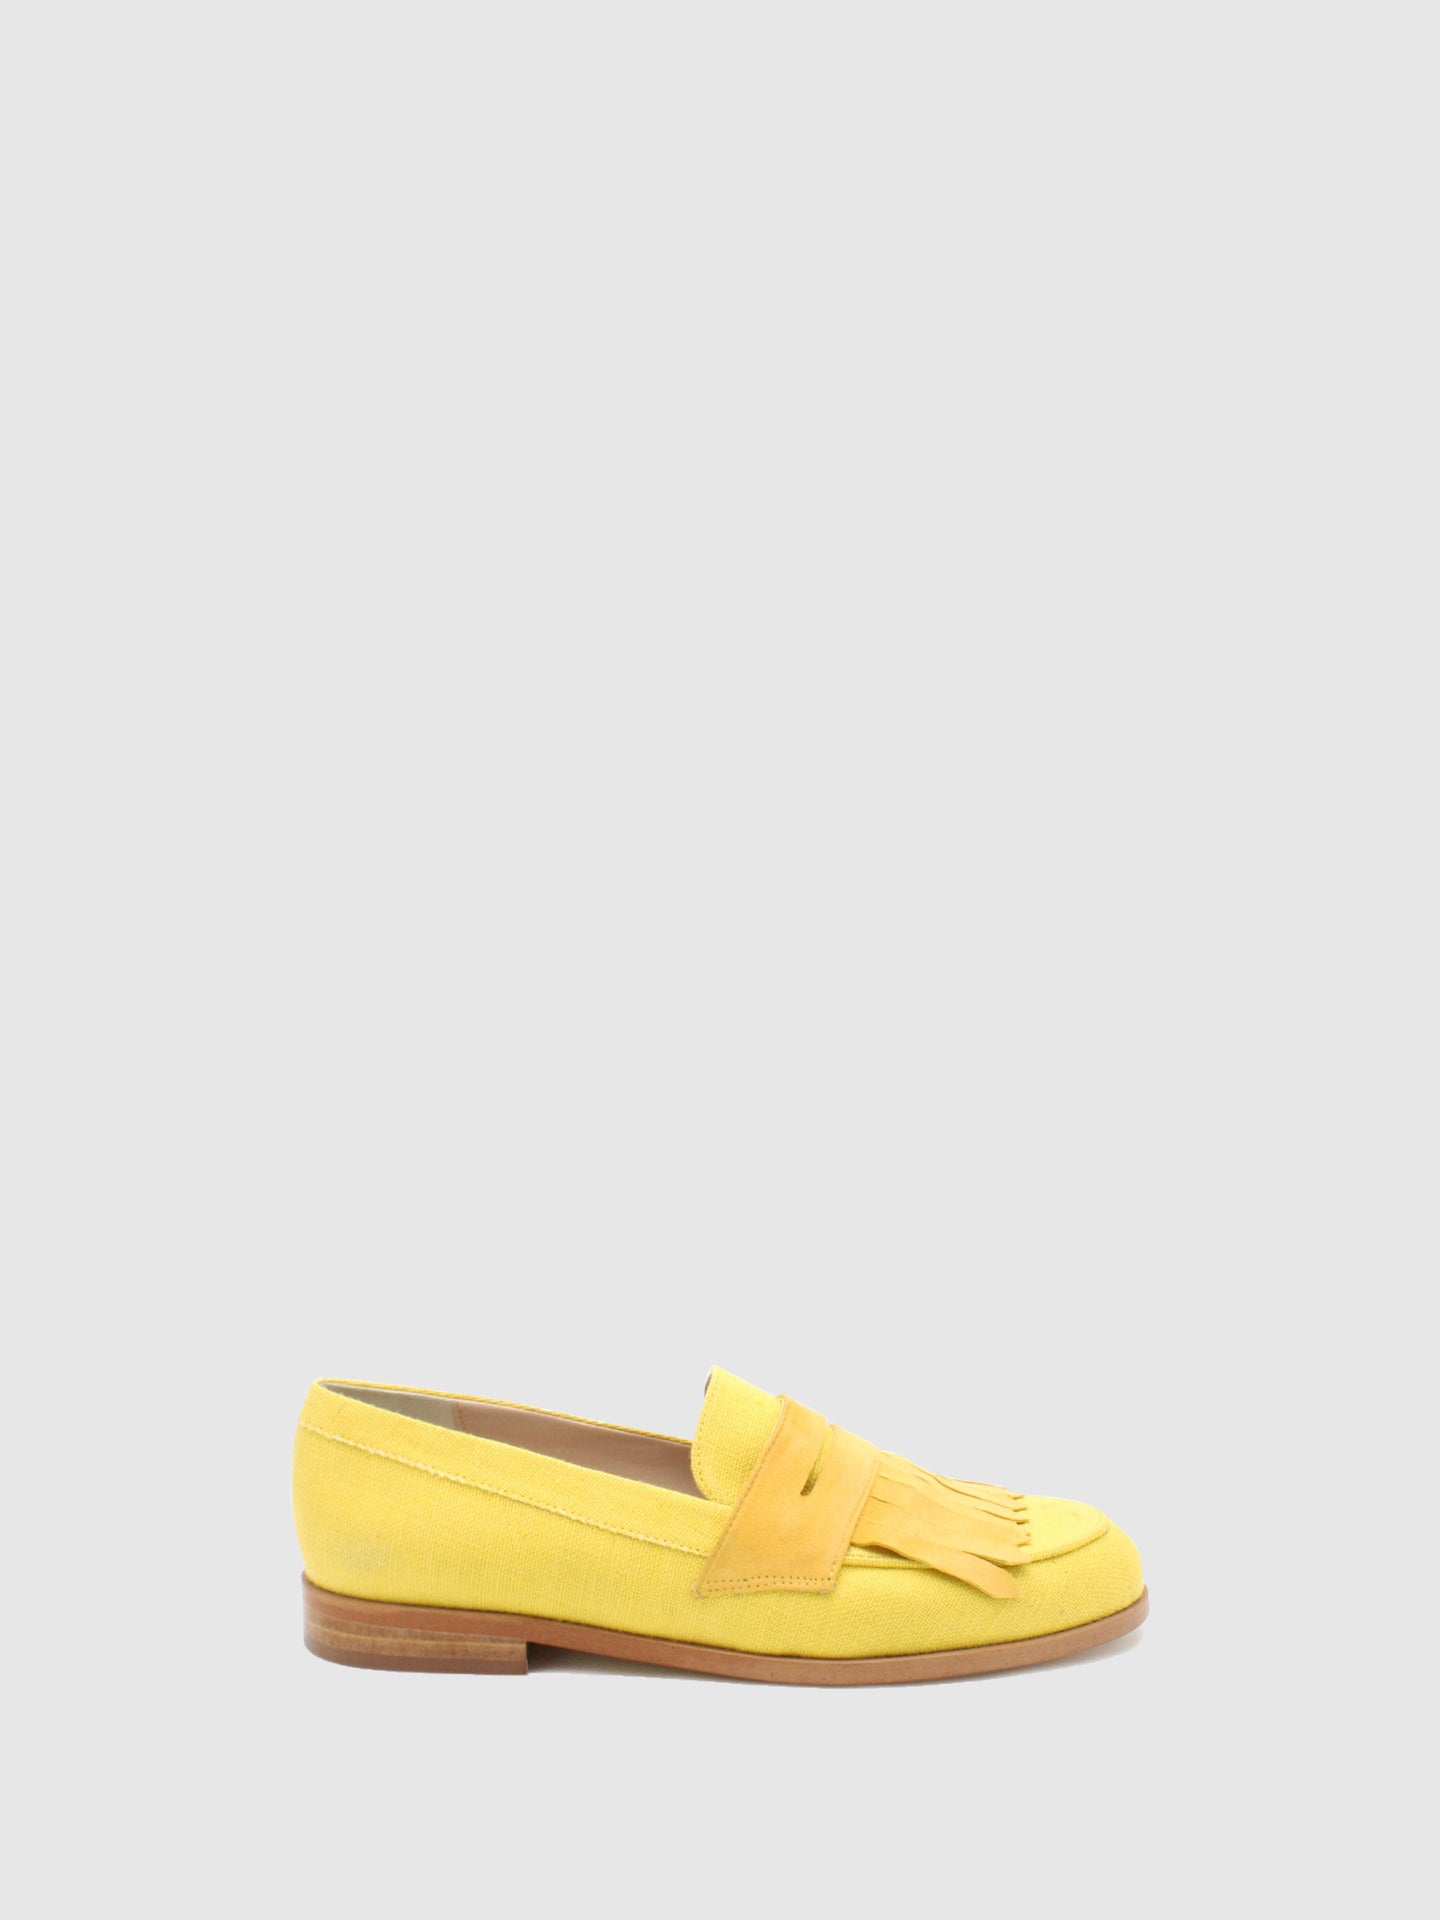 JJ Heitor Loafers Clássicos Agave Yellow